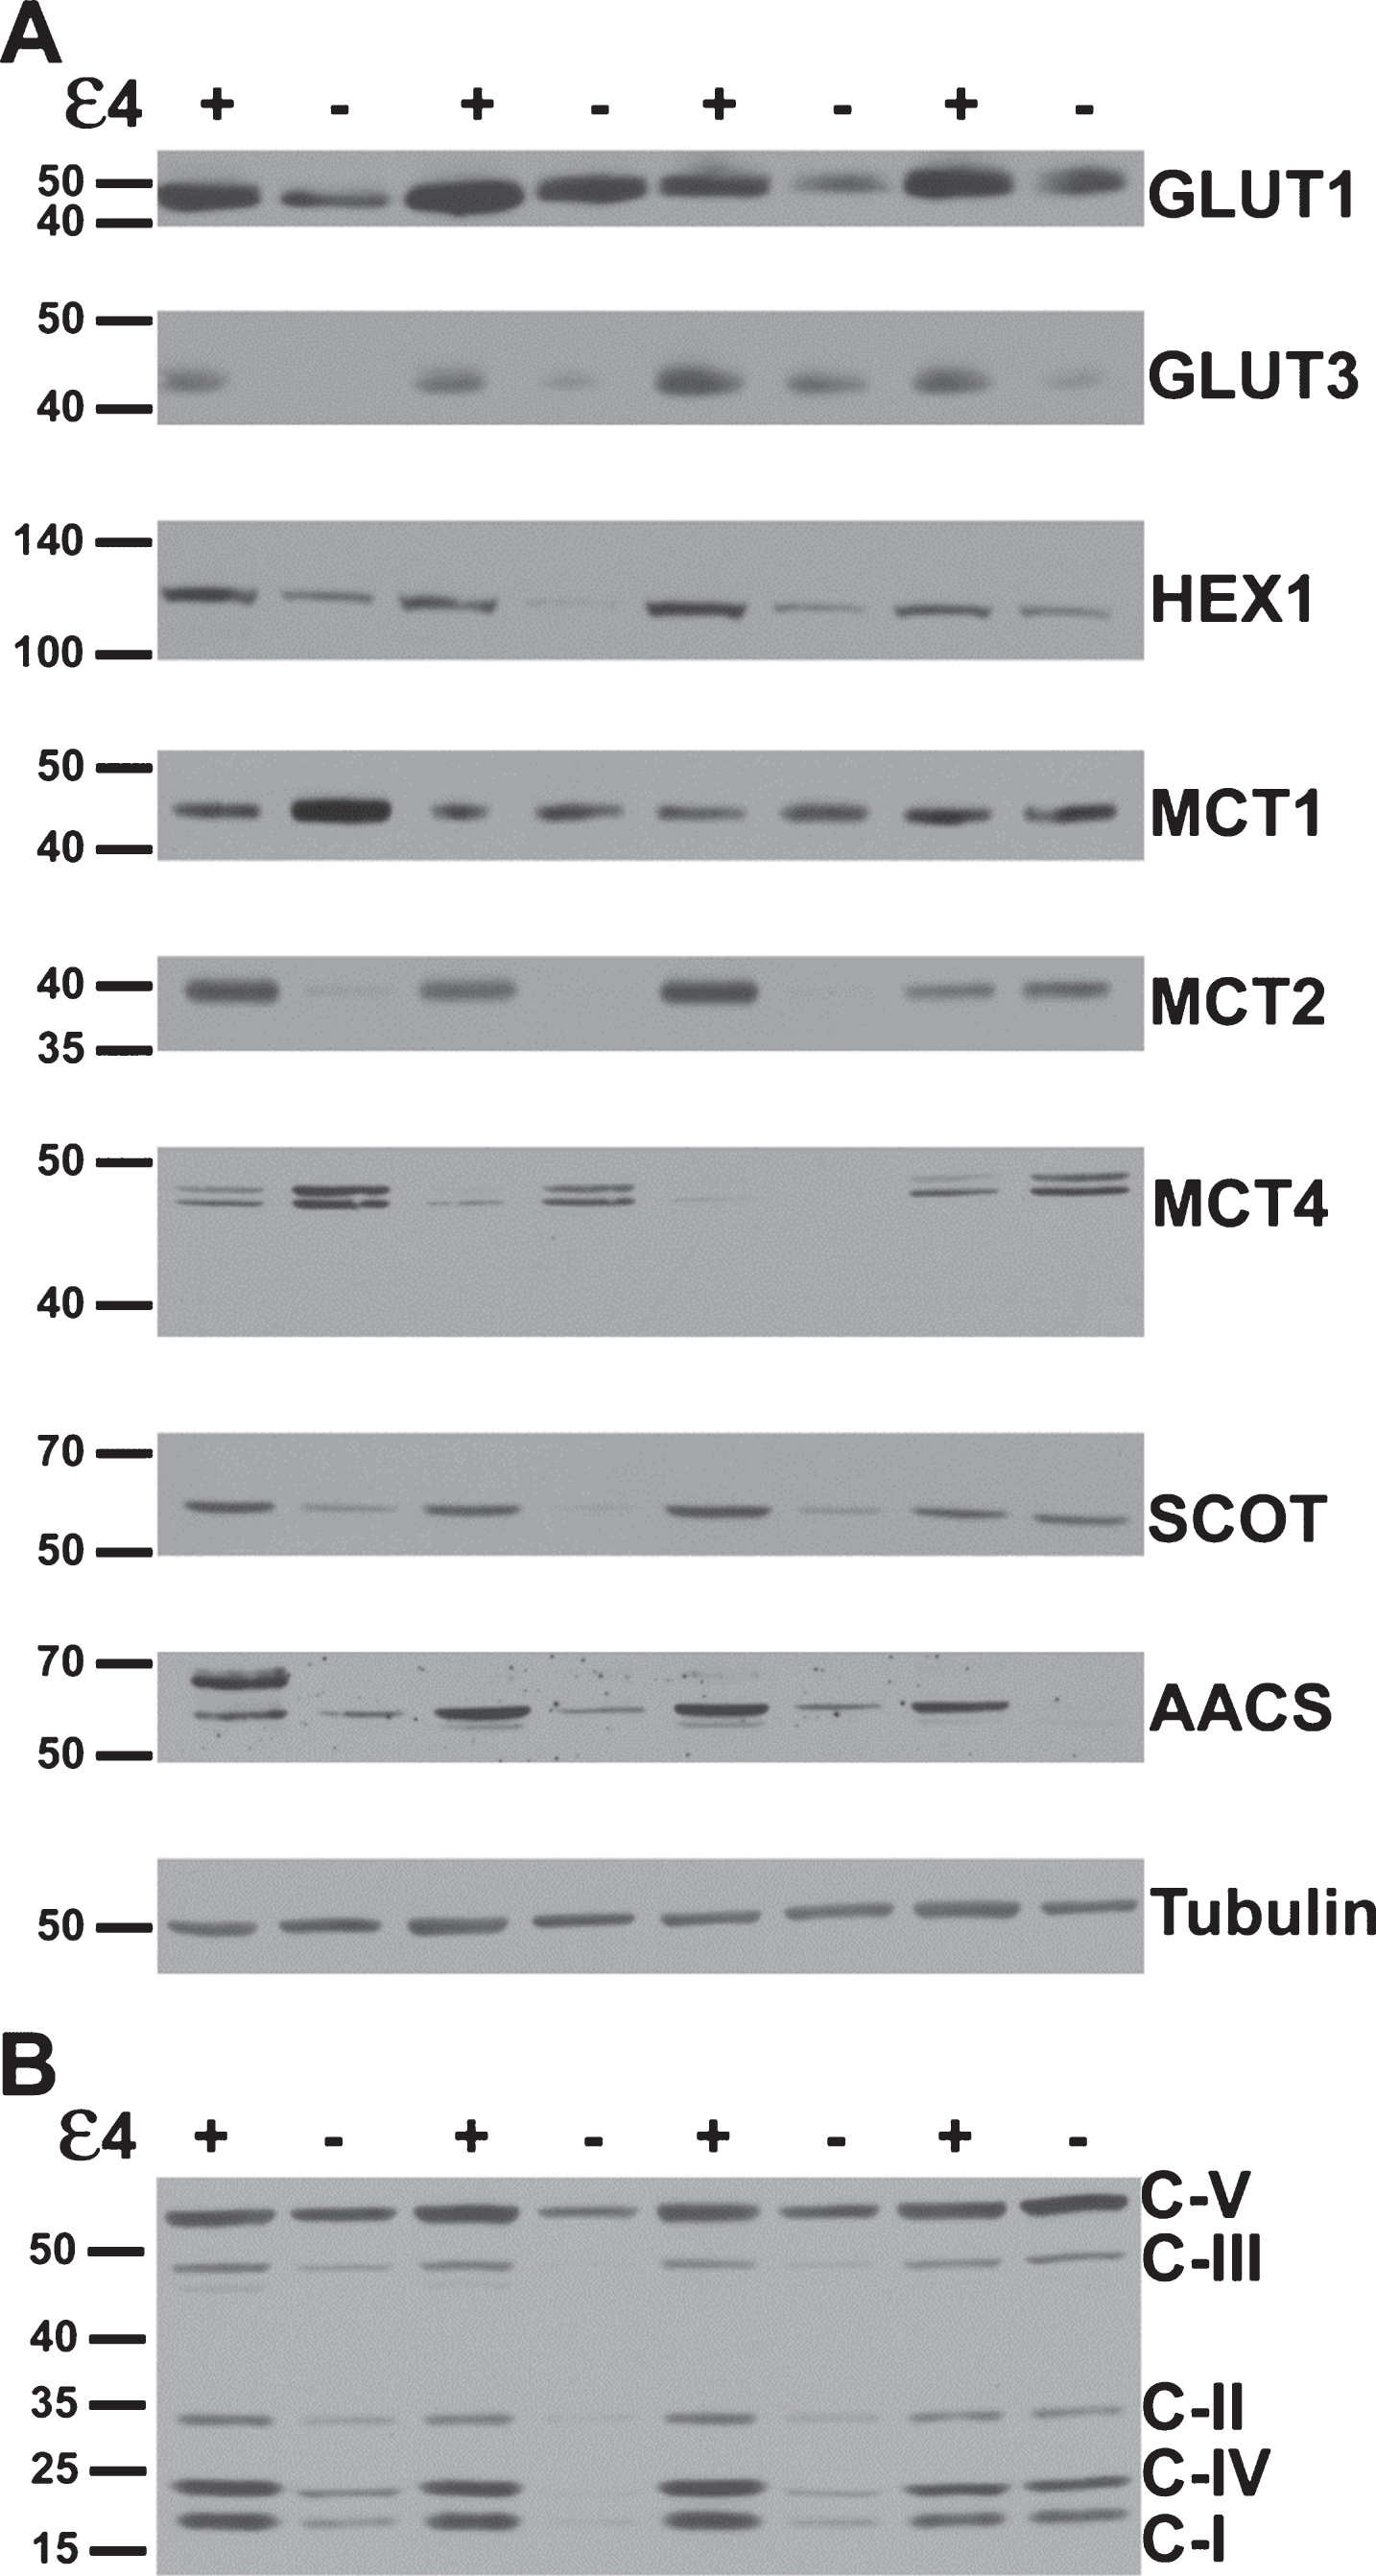 Several key metabolic proteins show altered expression in APOE4 carriers. A) Representative western blots of proteins underlying brain glucose and ketone metabolism. Each protein target was analyzed with a separate probe; however, GLUT1, GLUT3, MCT1, and MCT4 results shown here align to the same subjects. Similarly, HEX1, MCT2, SCOT, and AACS shown here align to the same second set of subjects. Analysis proceeded on three such sets in total for each target (N = 24), in triplicate. B) A representative western blot resulting from application of the antibody cocktail against mitochondrial oxidative phosphorylation protein subunits. Analysis proceeded on three such sets (N = 24), in triplicate.